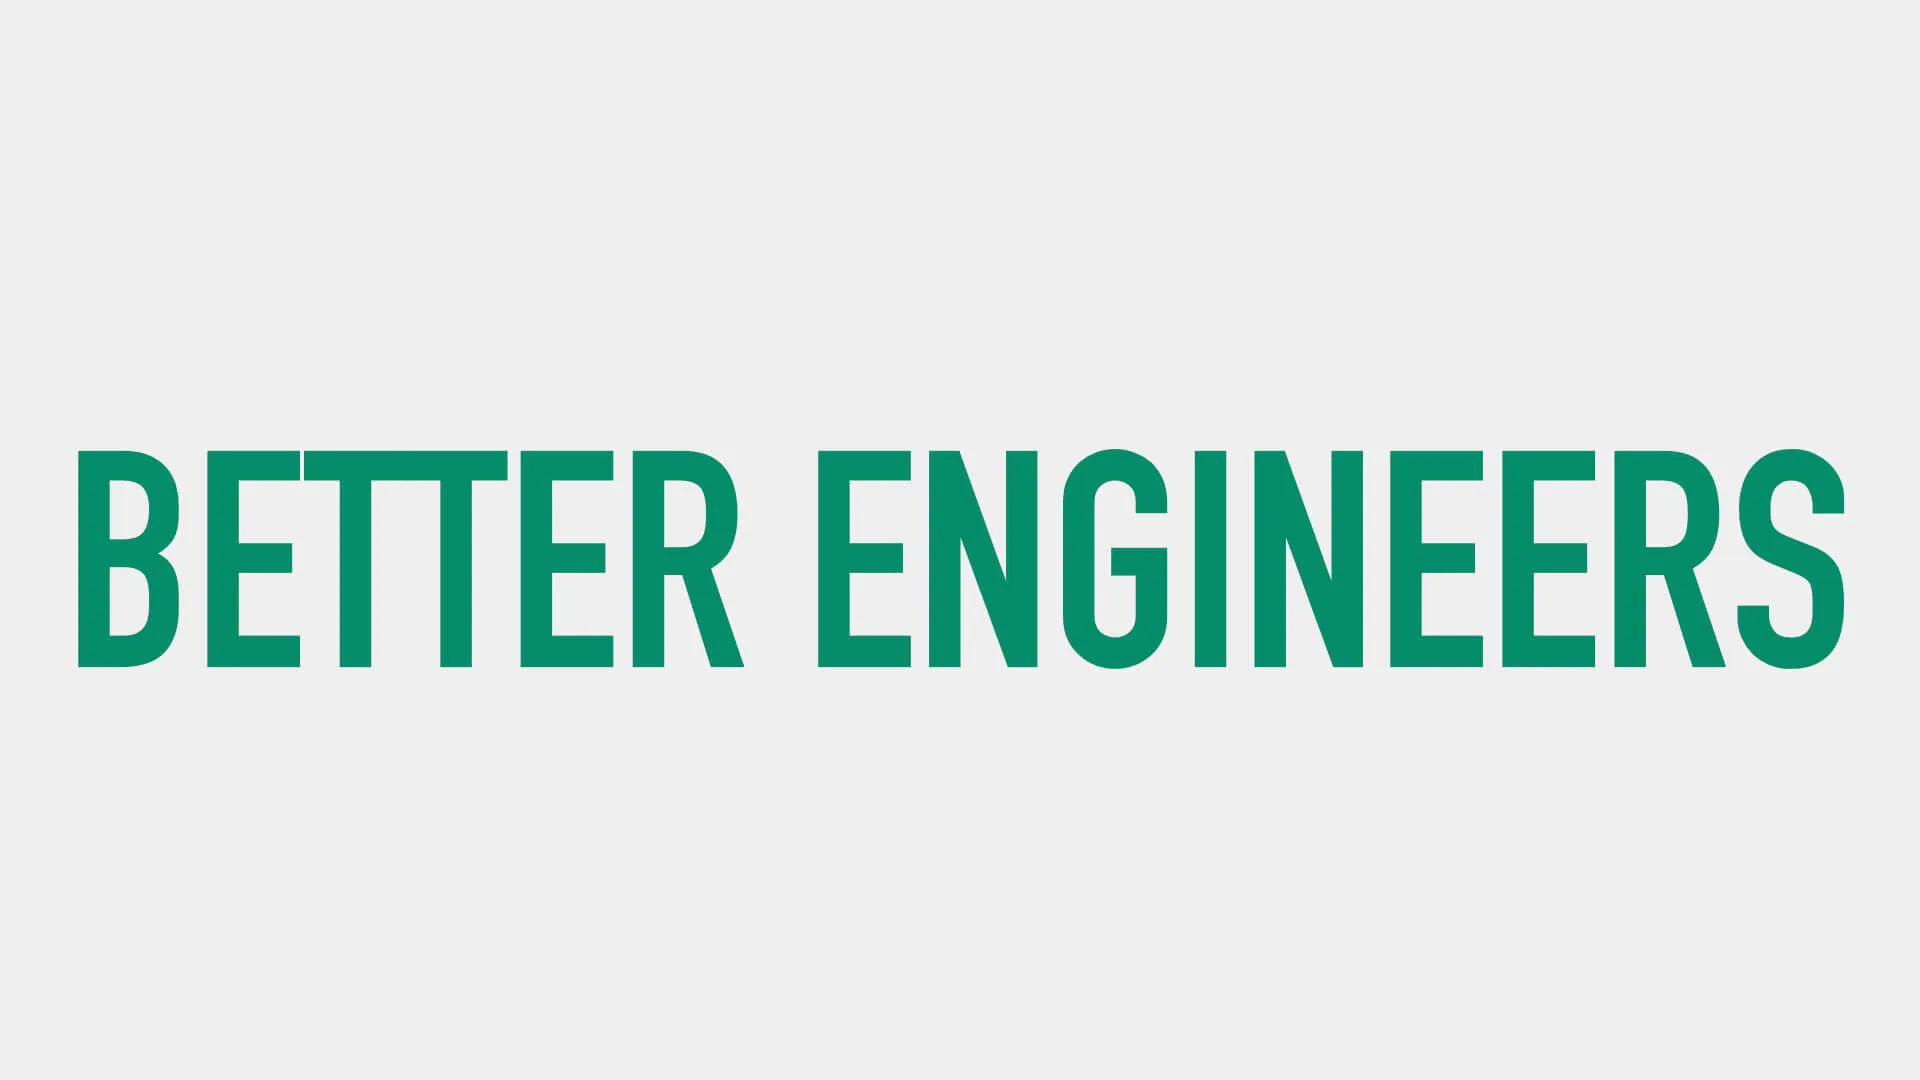 A title slide that says "Better Engineers"